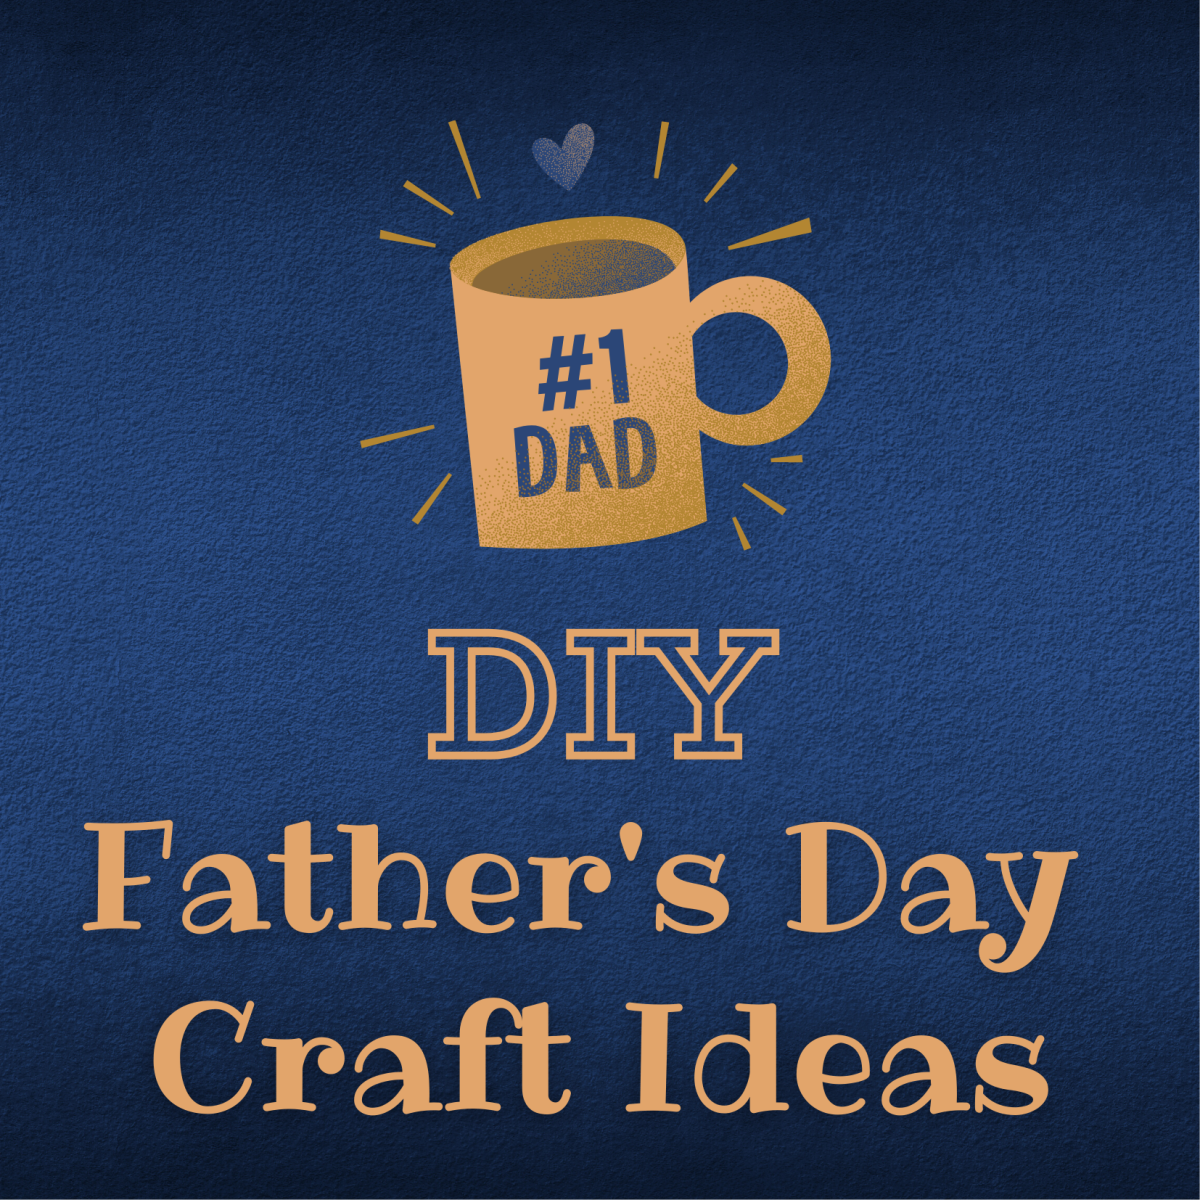 20+ Adorable DIY Father's Day Craft Ideas